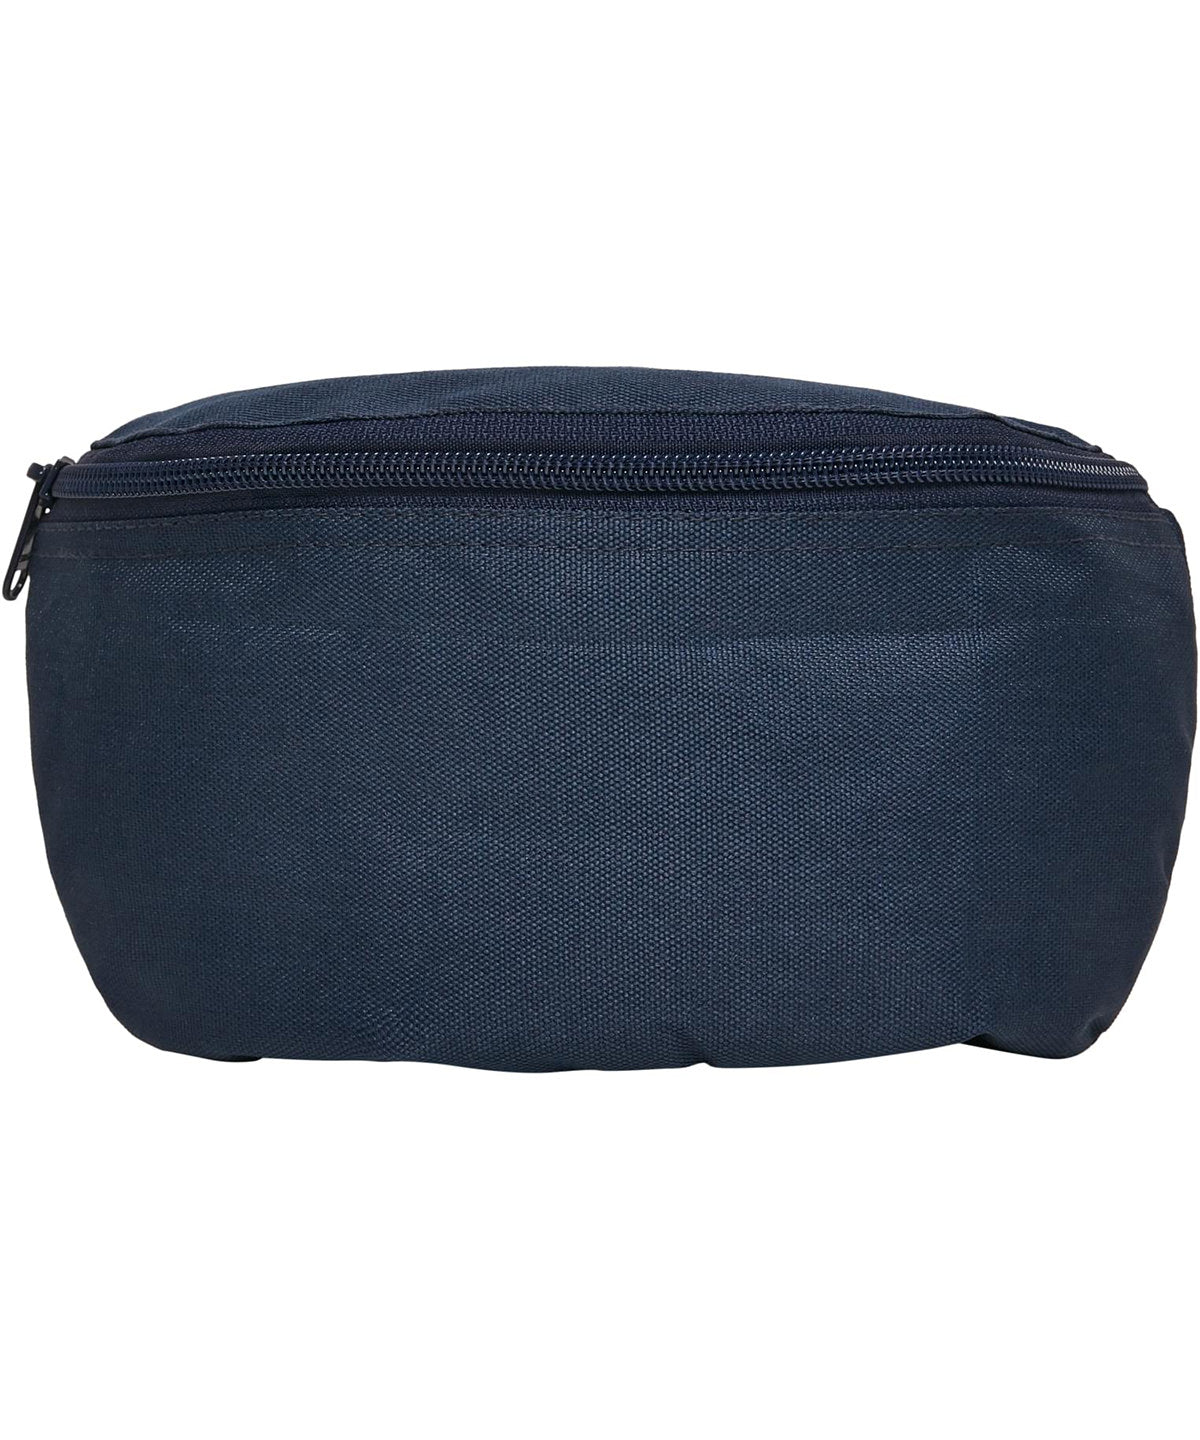 Personalised Bags - Navy Build Your Brand Hip bag